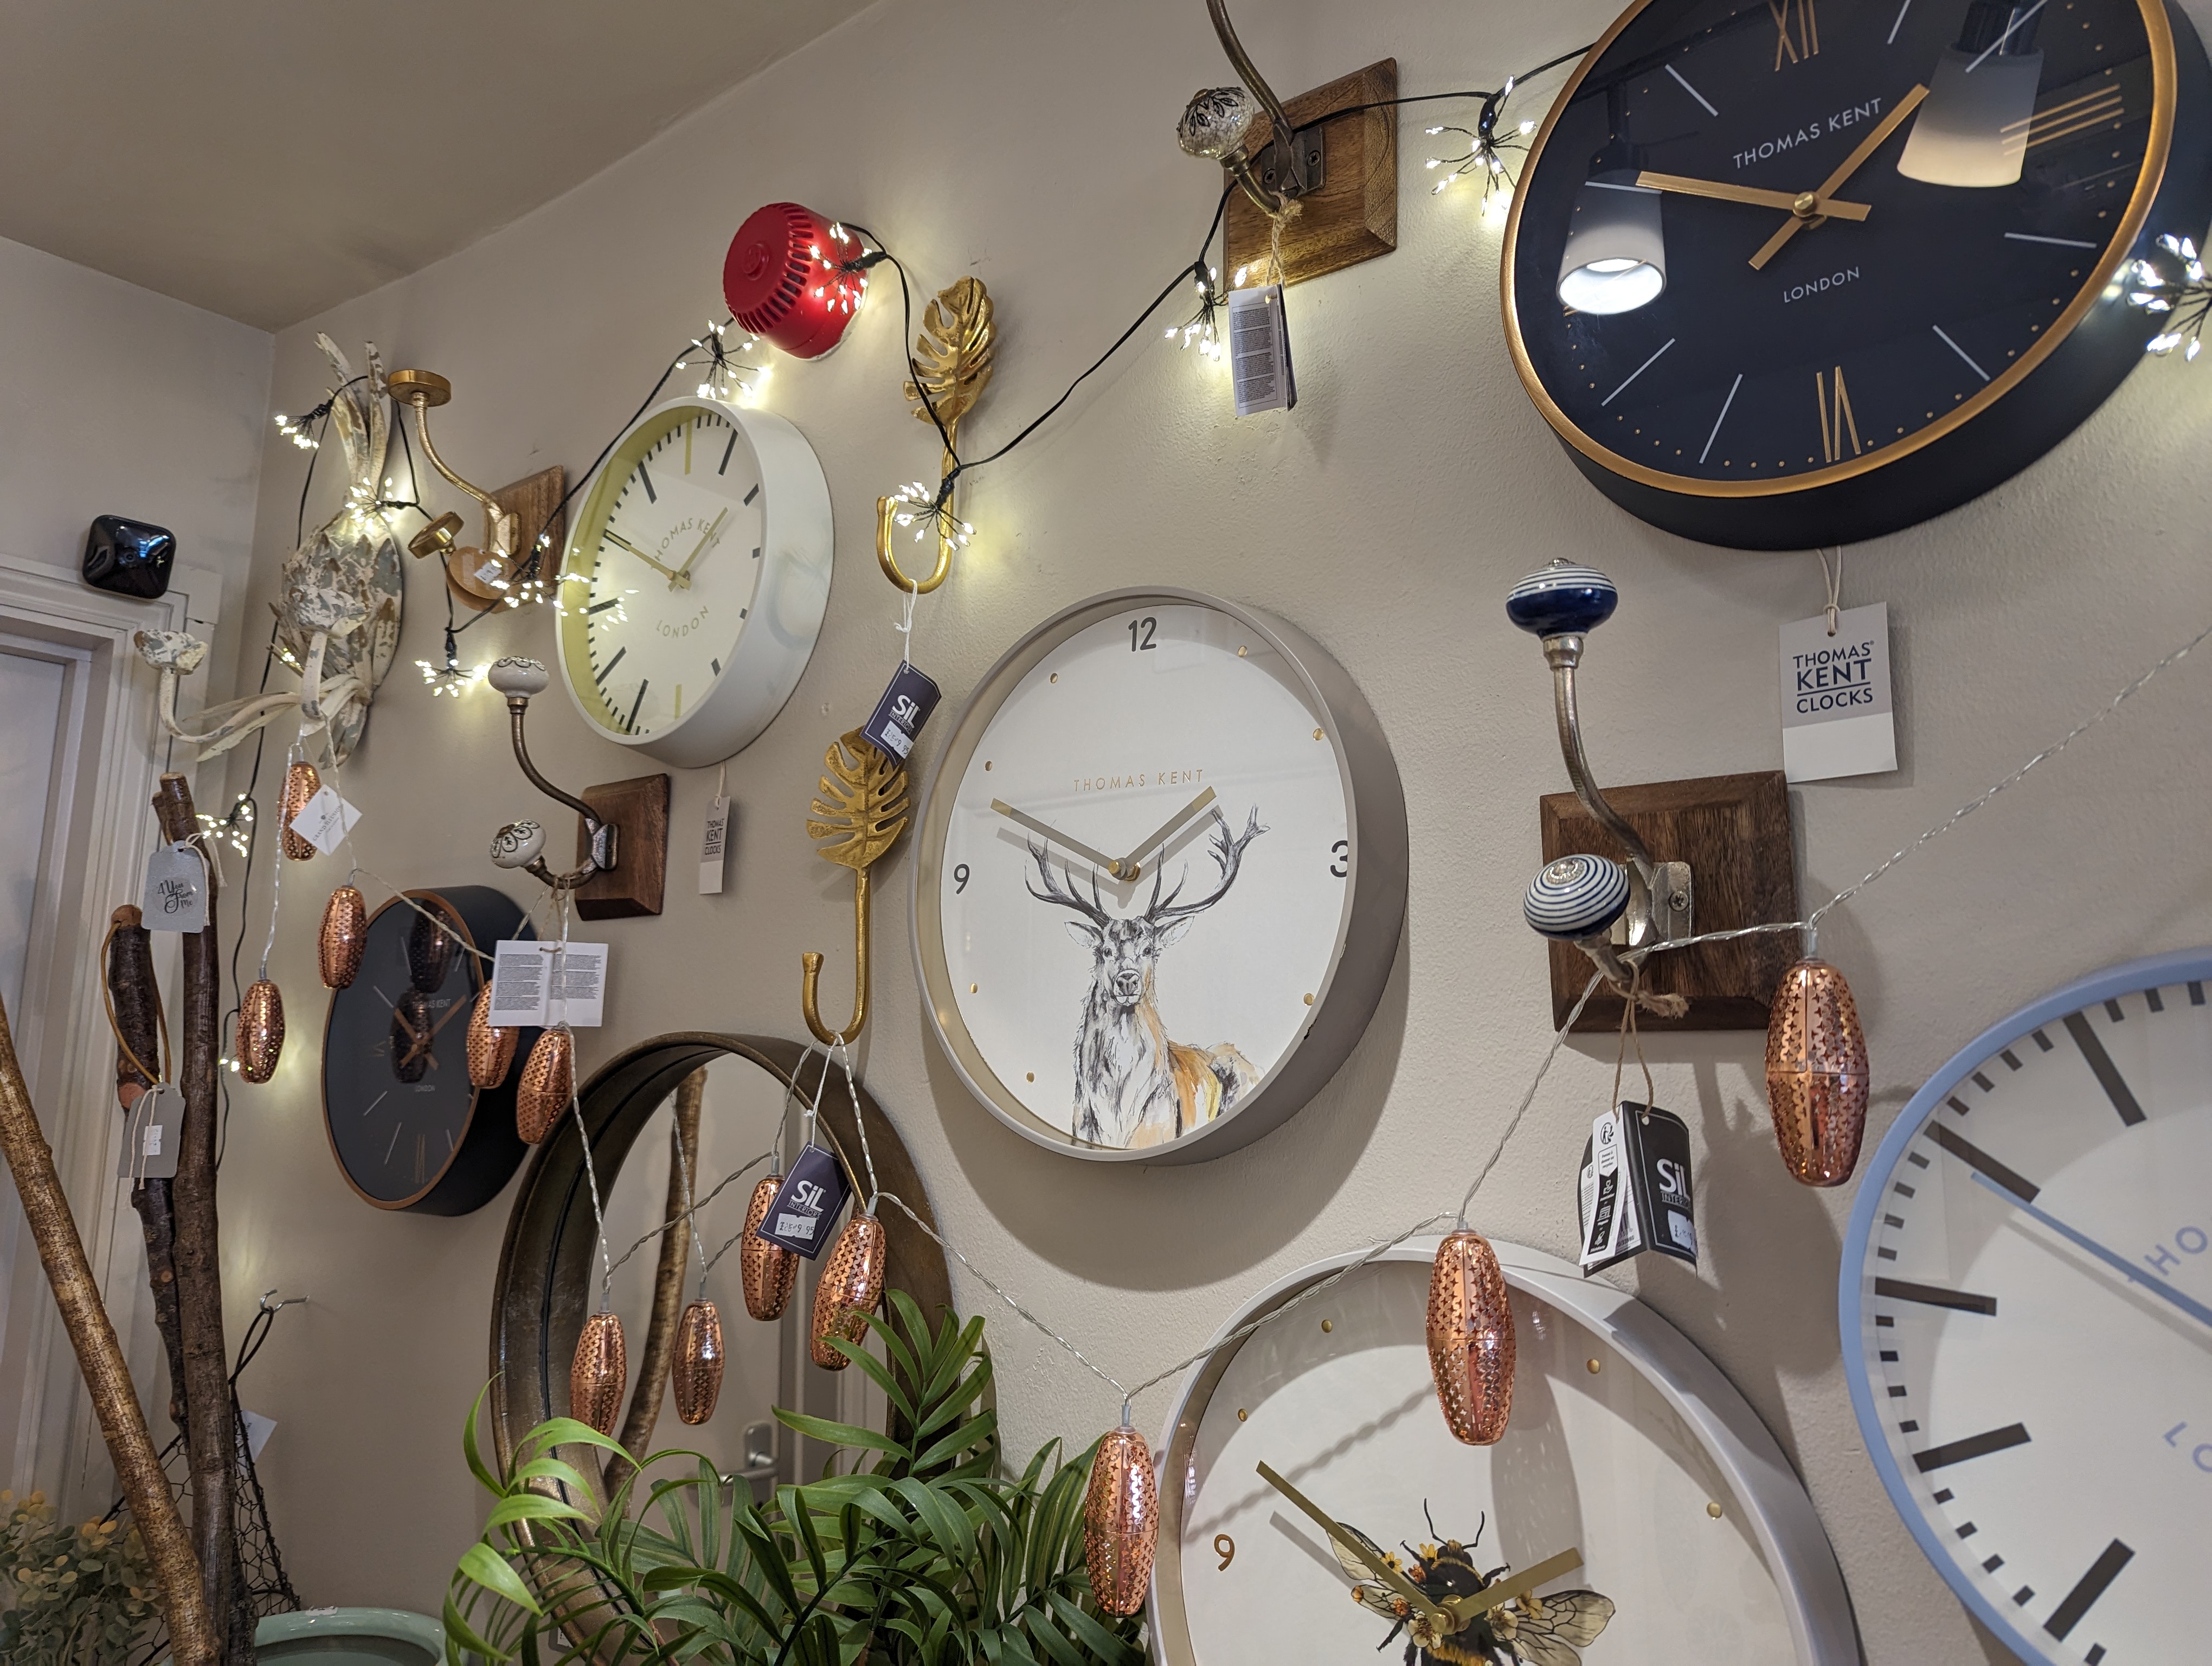 A selection of clocks available for purchase (Nub News)